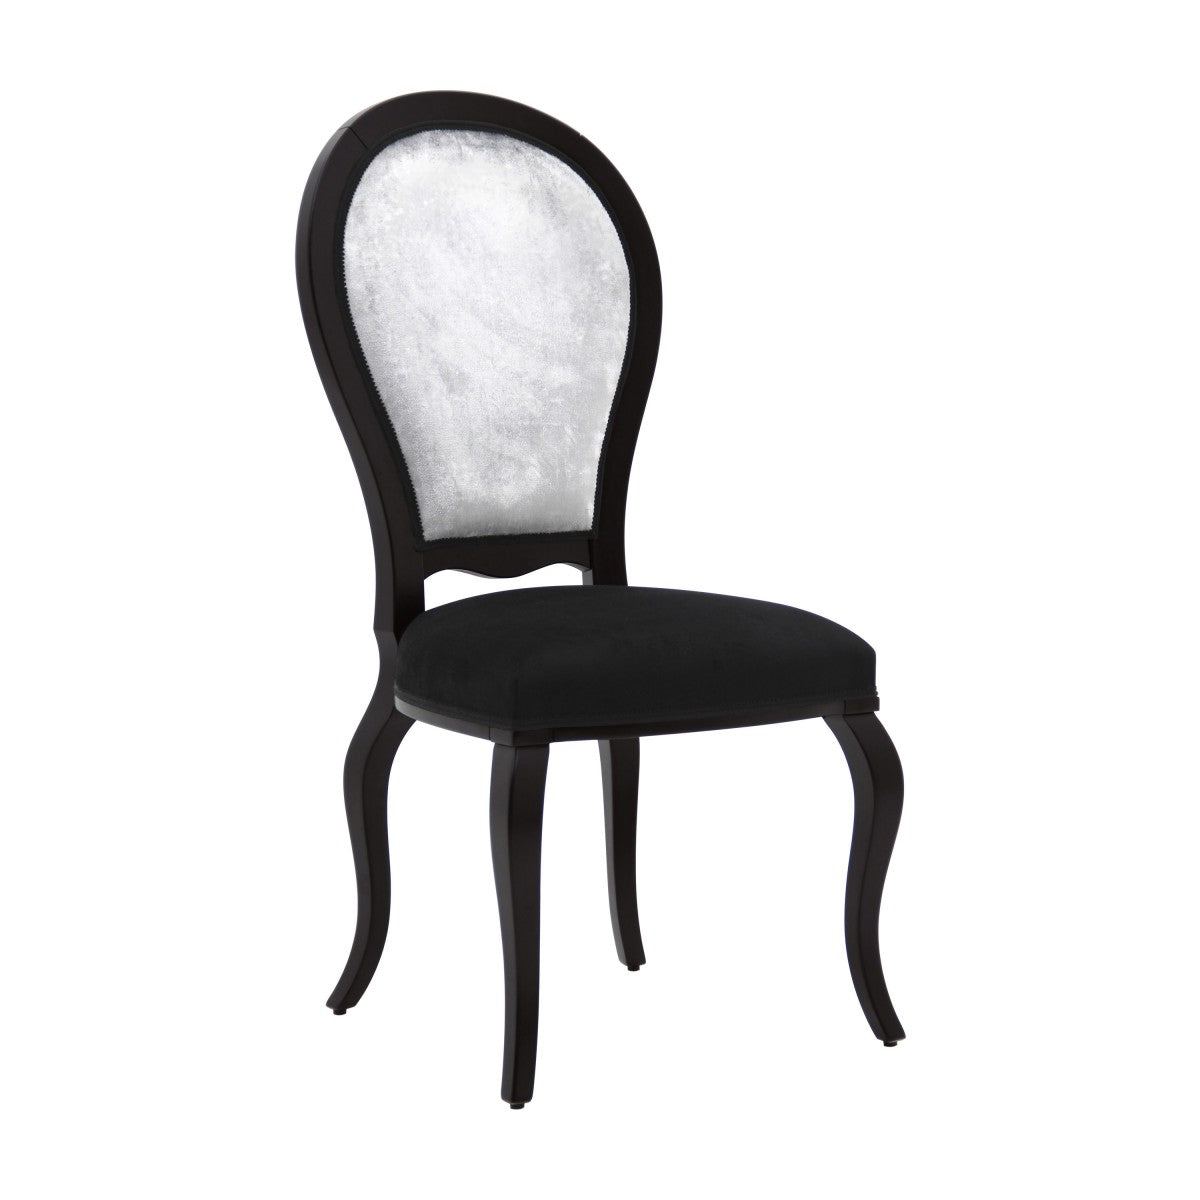 Angel Bespoke Upholstered Modern Contemporary Dining Chair MS181S Custom Made To Order